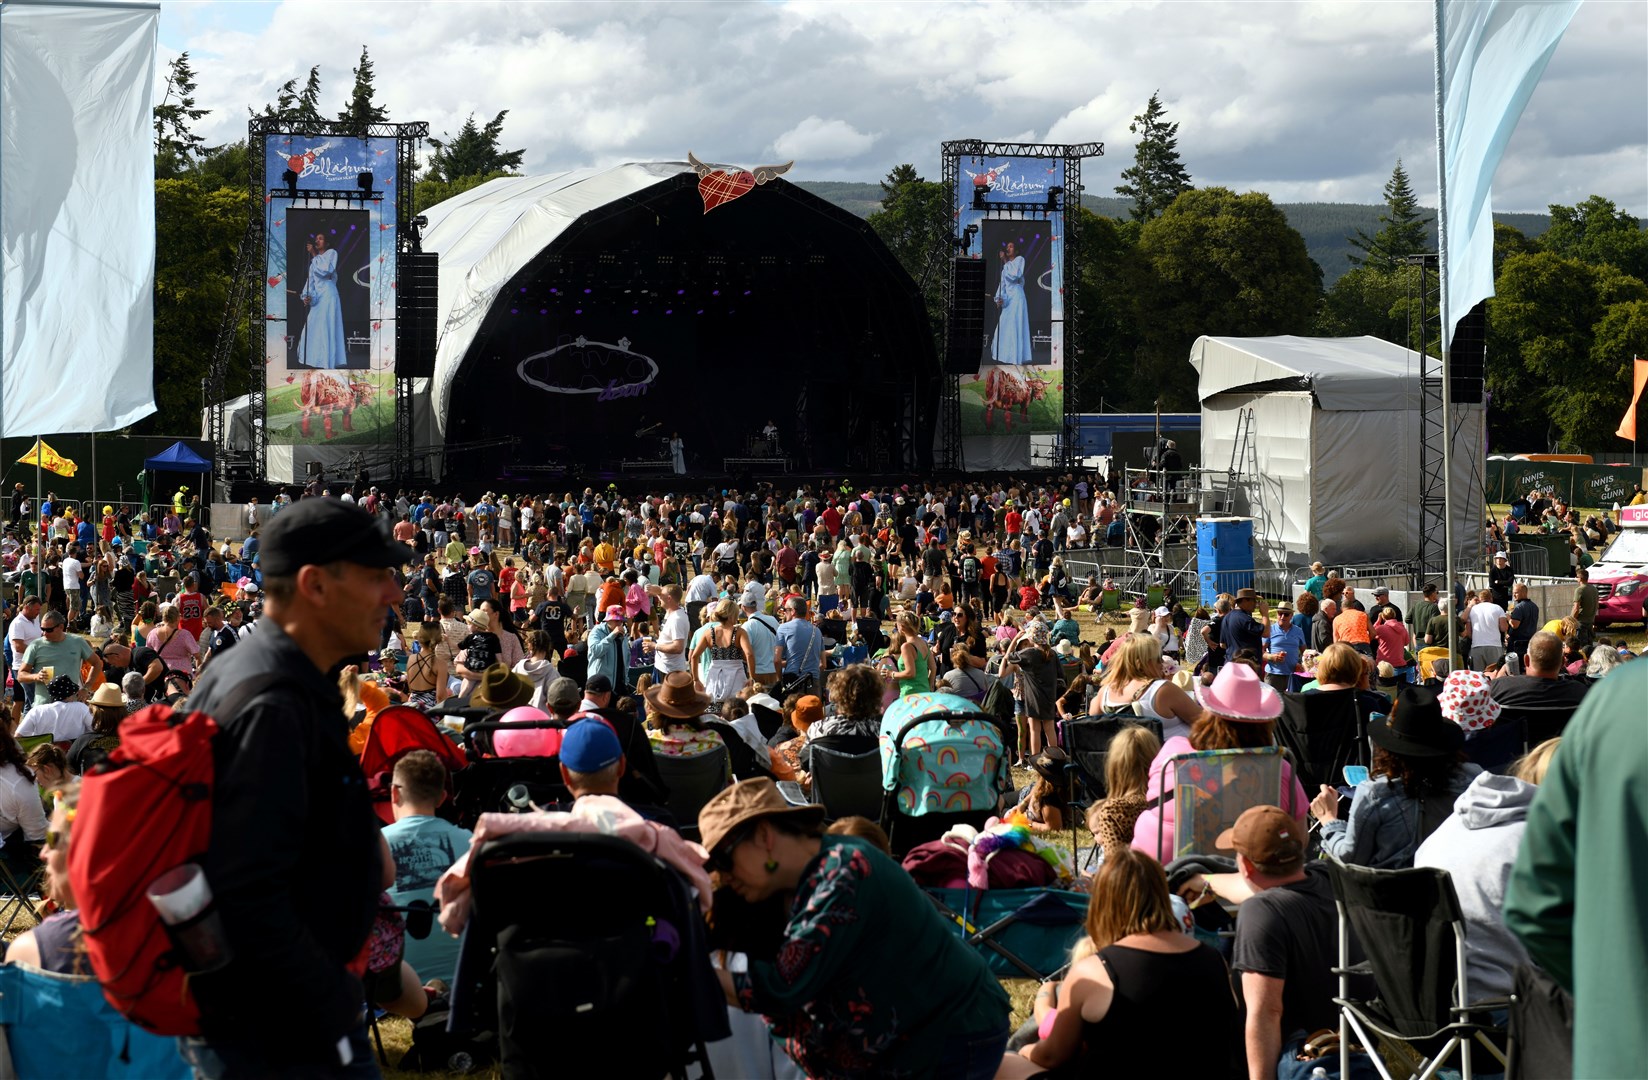 Belladrum attracts thousands of people.